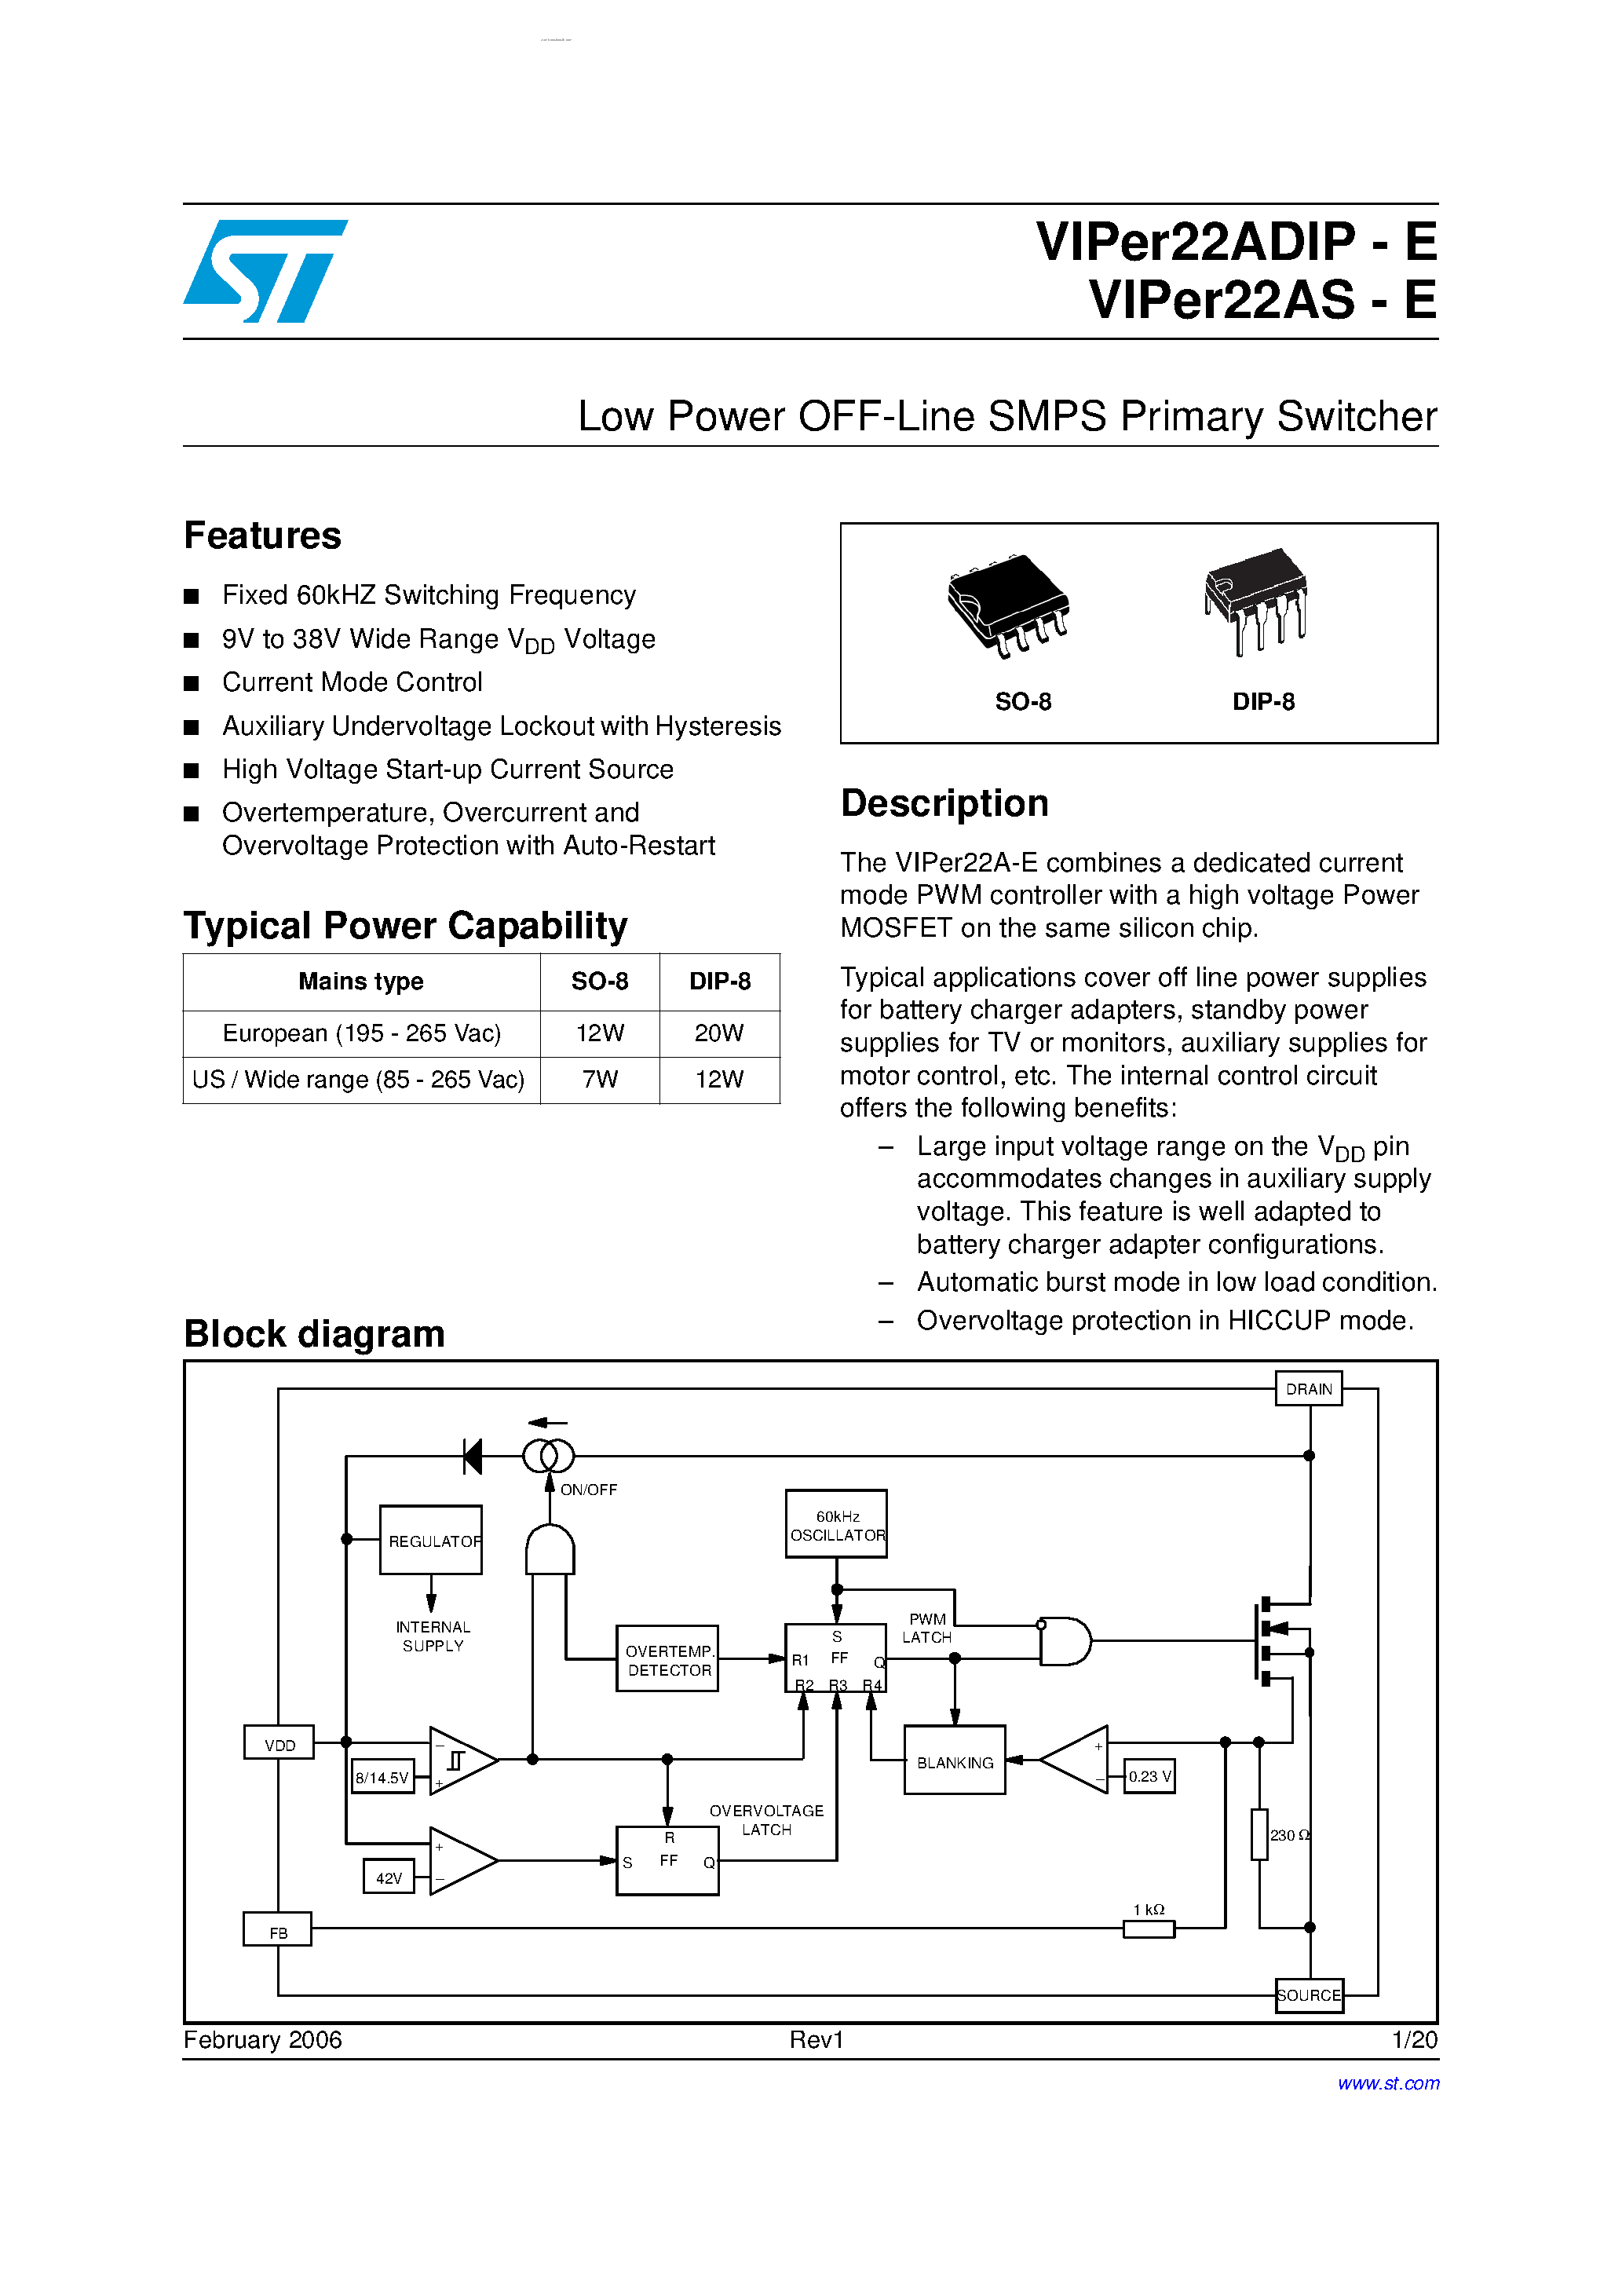 Даташит VIPER22ADIP-E - Low Power OFF-Line SMPS Primary Switcher страница 1